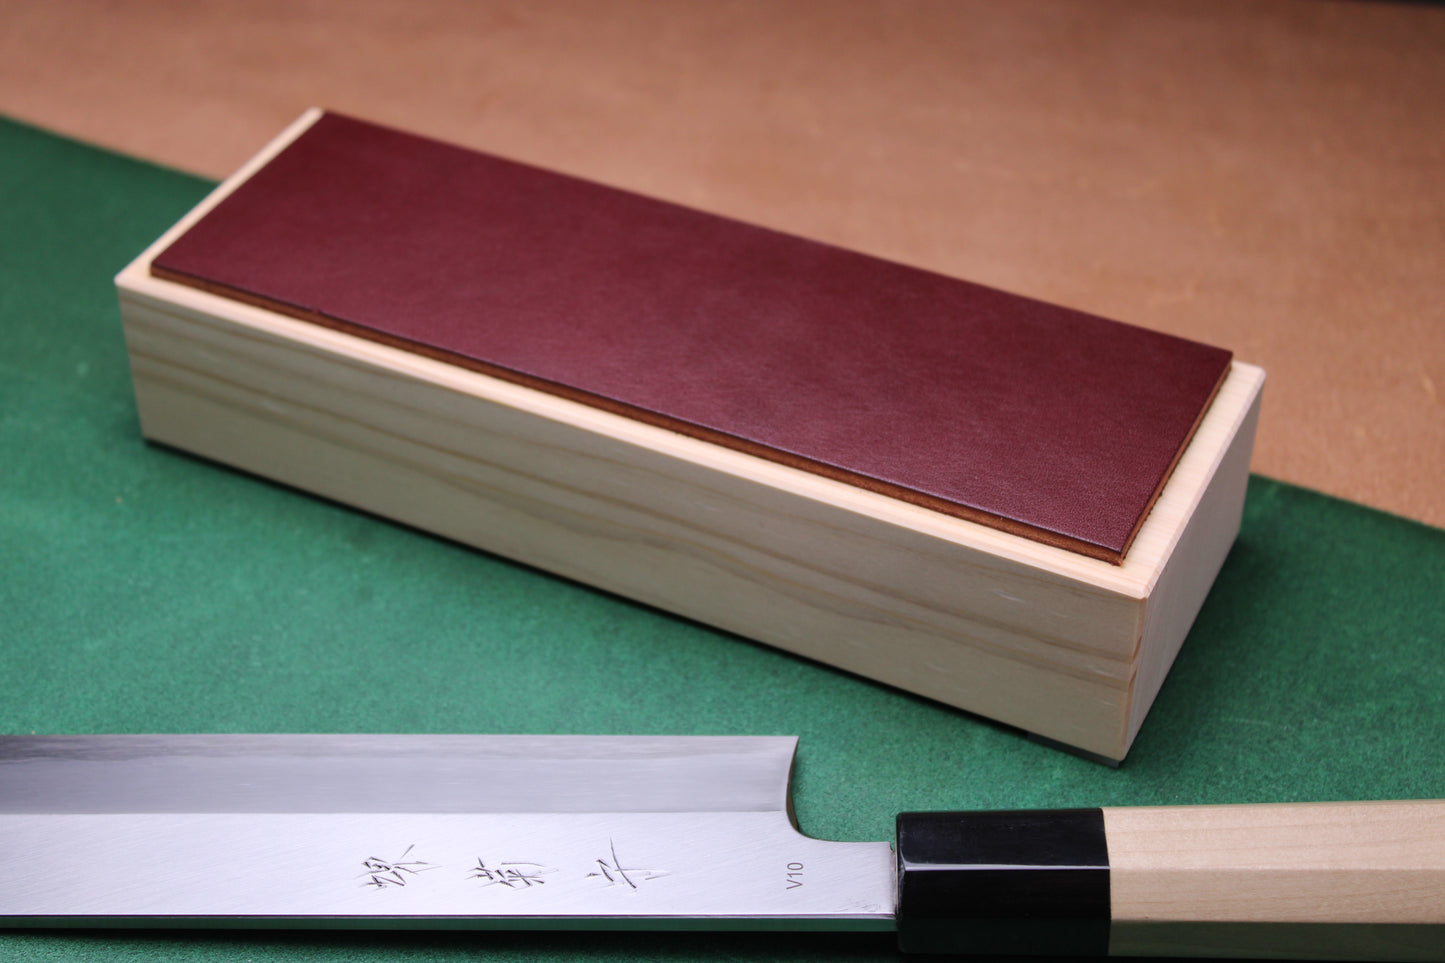 knife strop made of English bridle leather colored burgundy espresso brown attached to sturdy tall smooth hinoki wood base sakai kikumori japanese usuba vegetable knife foreground with background faded green and brown 